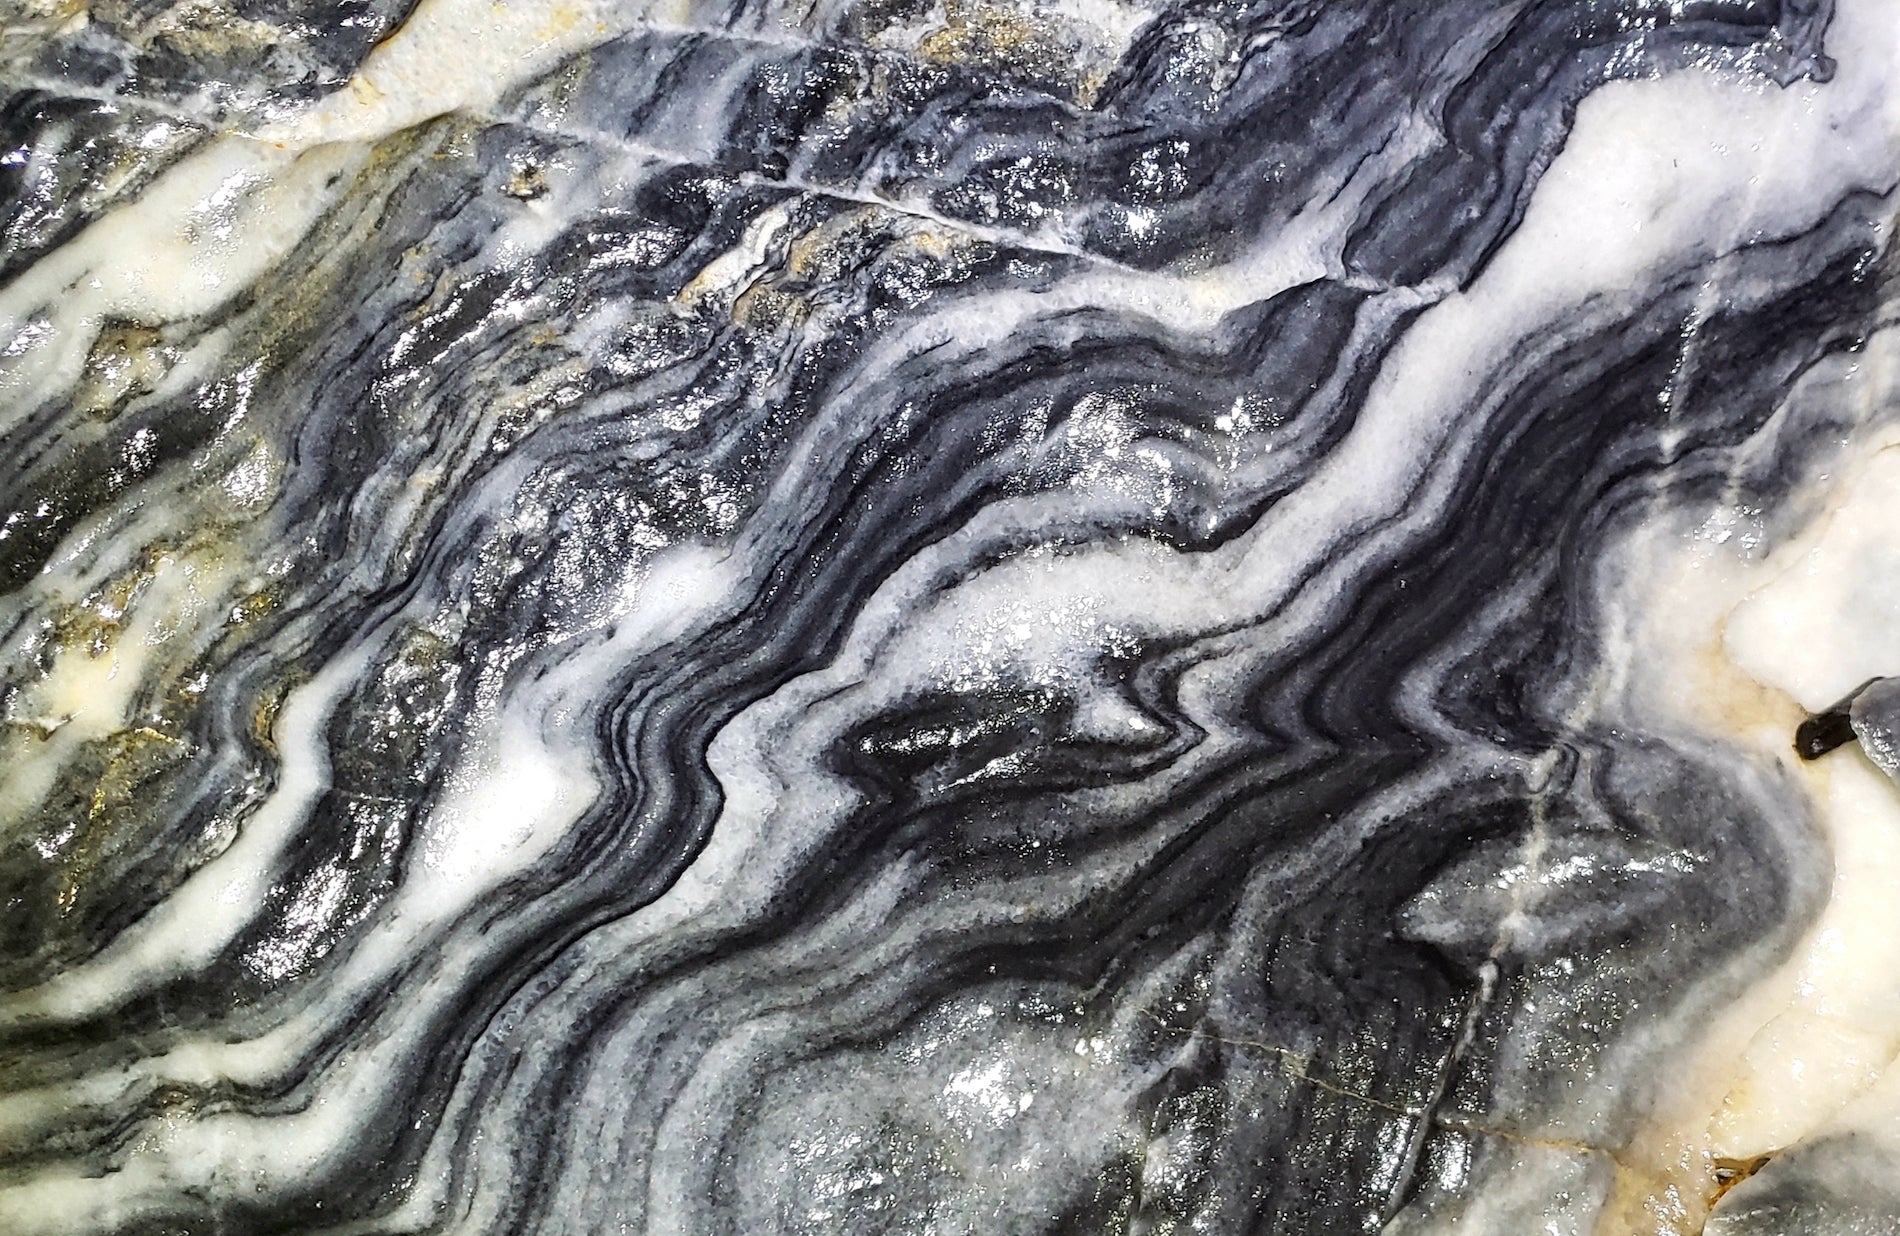 Photo or gray and white striped marbled rock from inside a cave